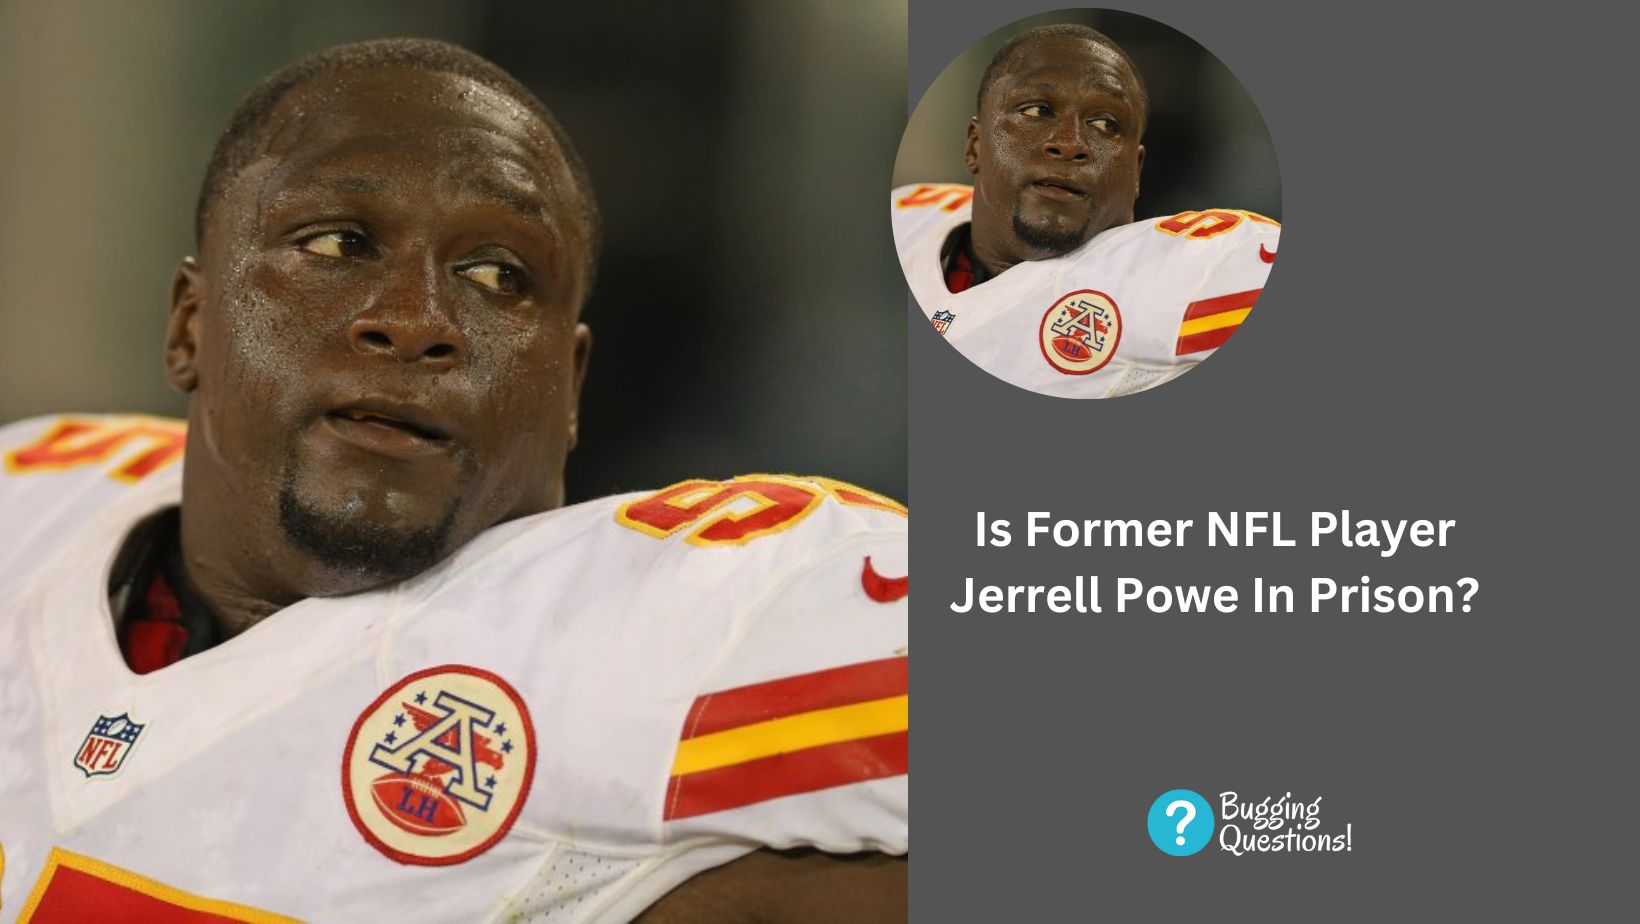 Is Former NFL Player Jerrell Powe In Prison?